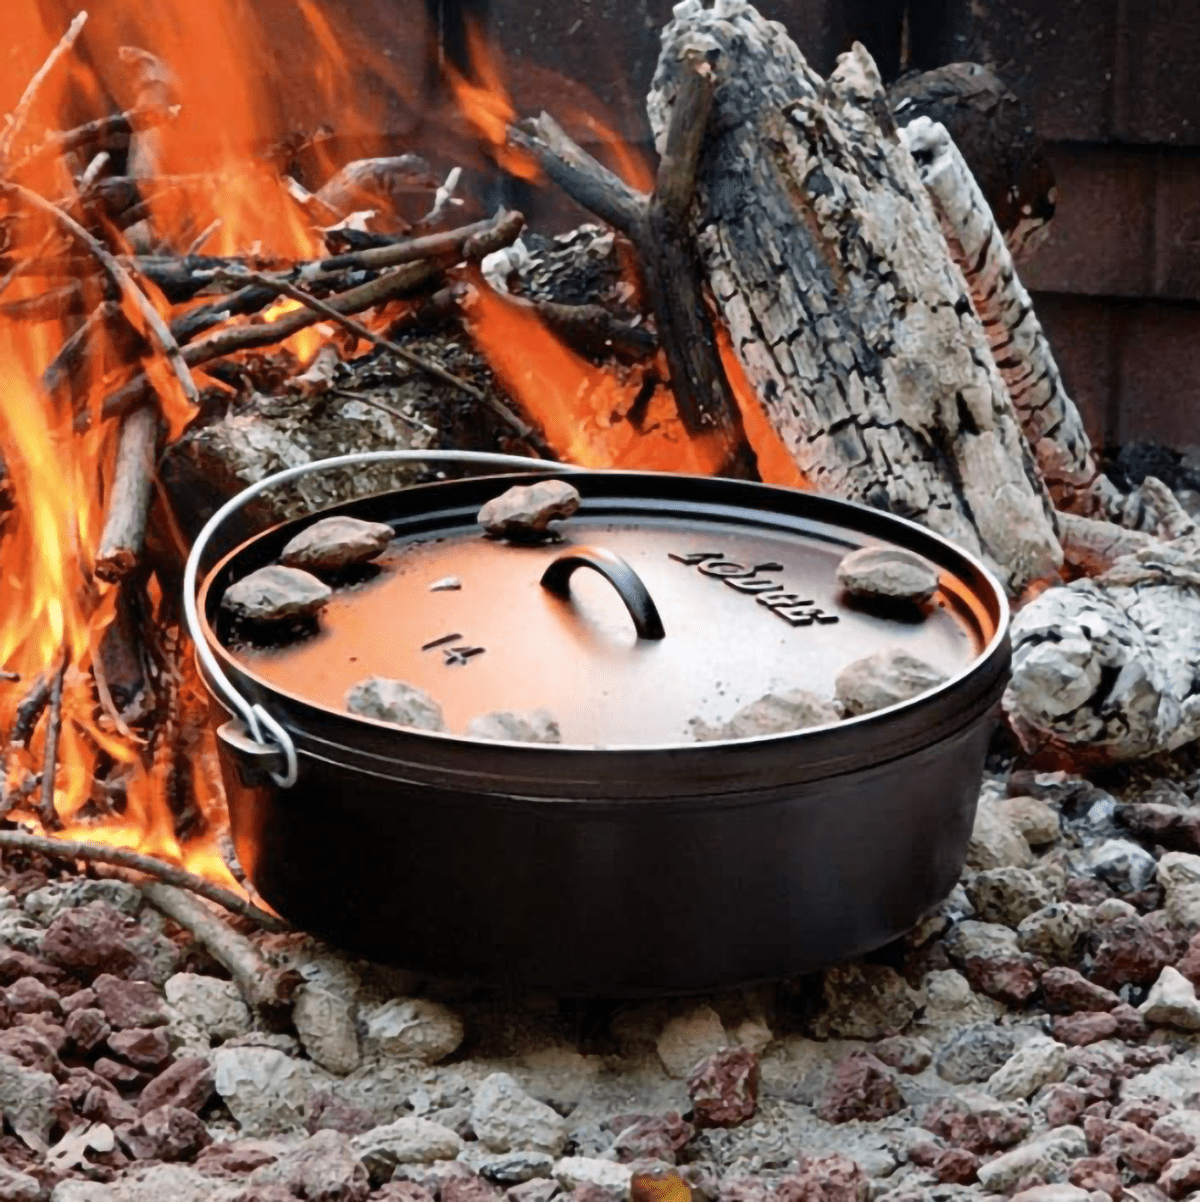 Lodge Cast Iron Cookware Deals Before 's Prime Early Access Sale